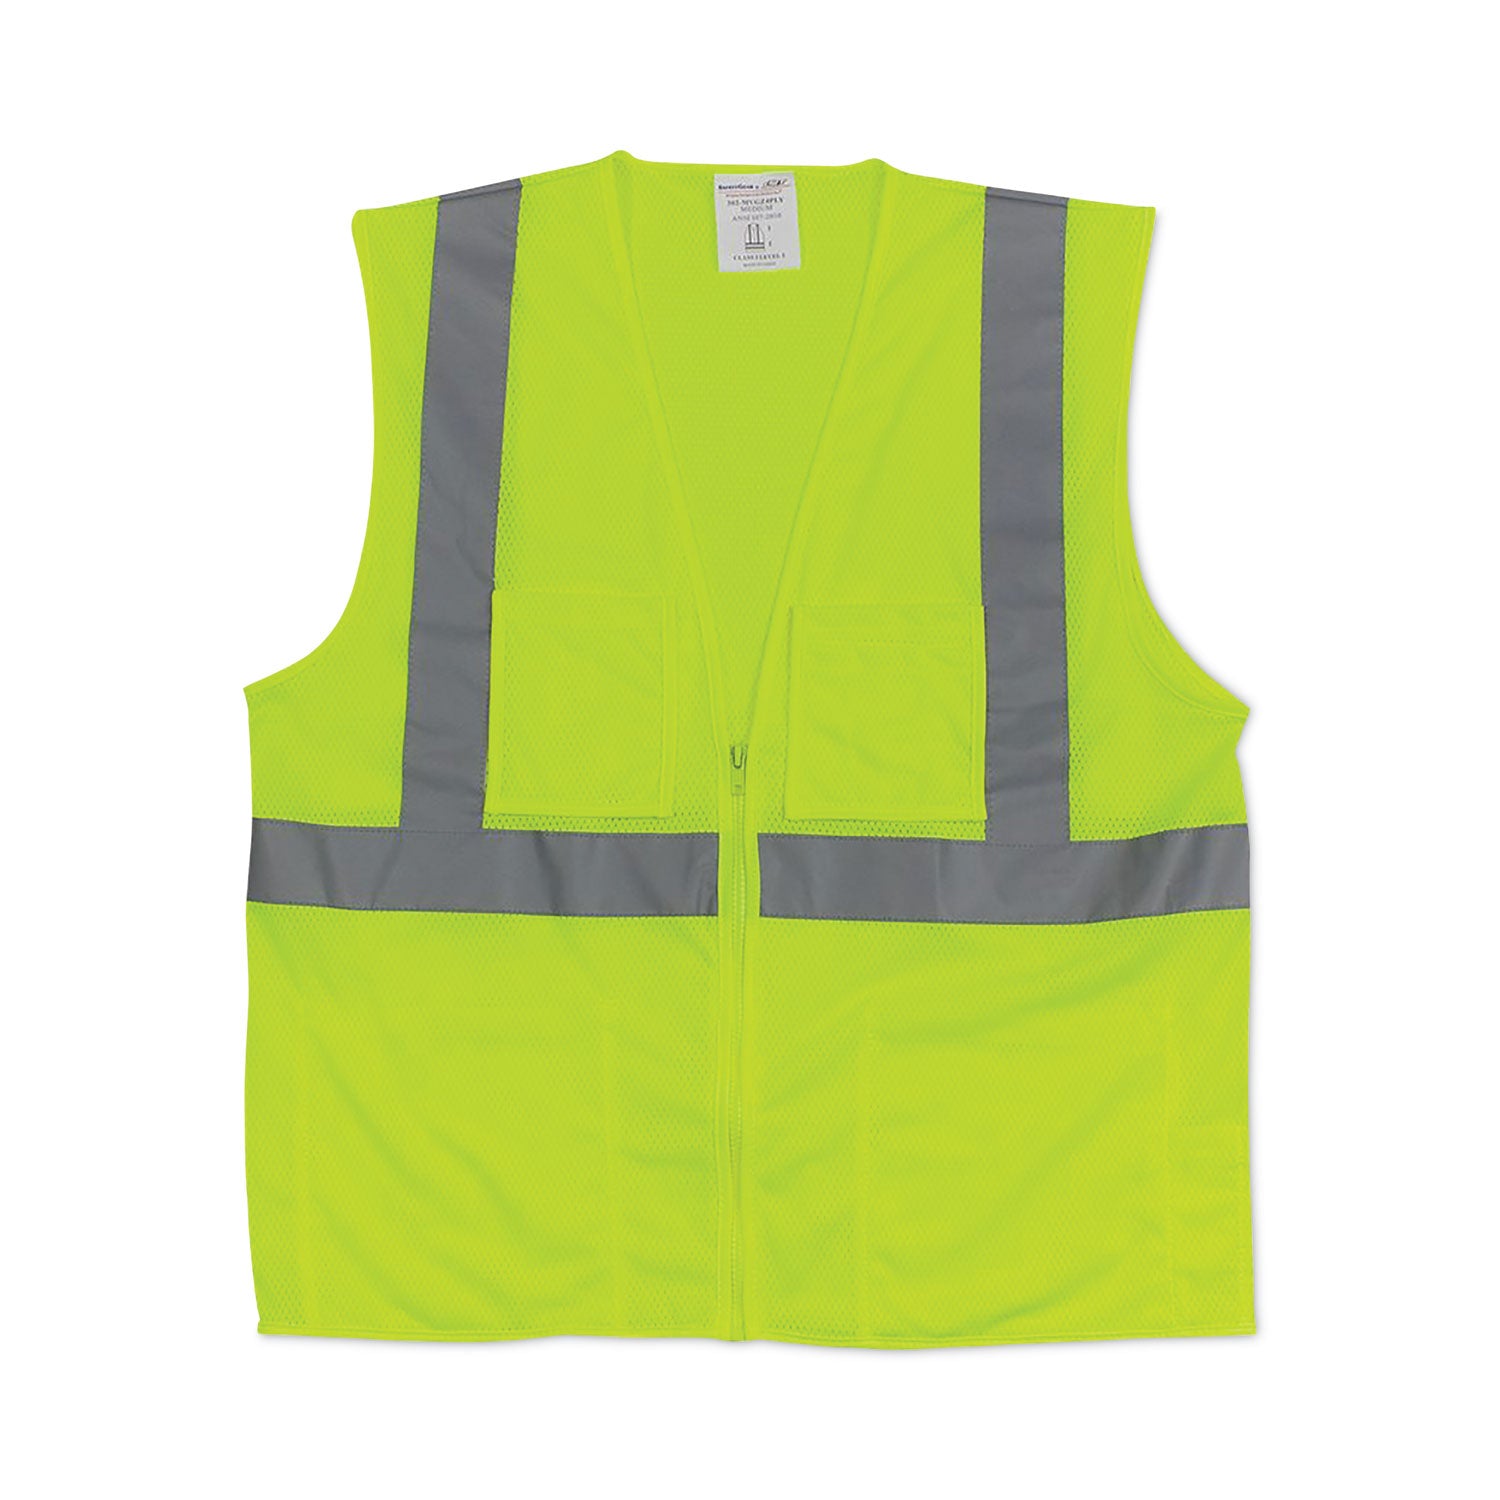 ansi-class-2-hook-and-loop-safety-vest-2x-large-hi-viz-lime-yellow_pid302mvgly2x - 1